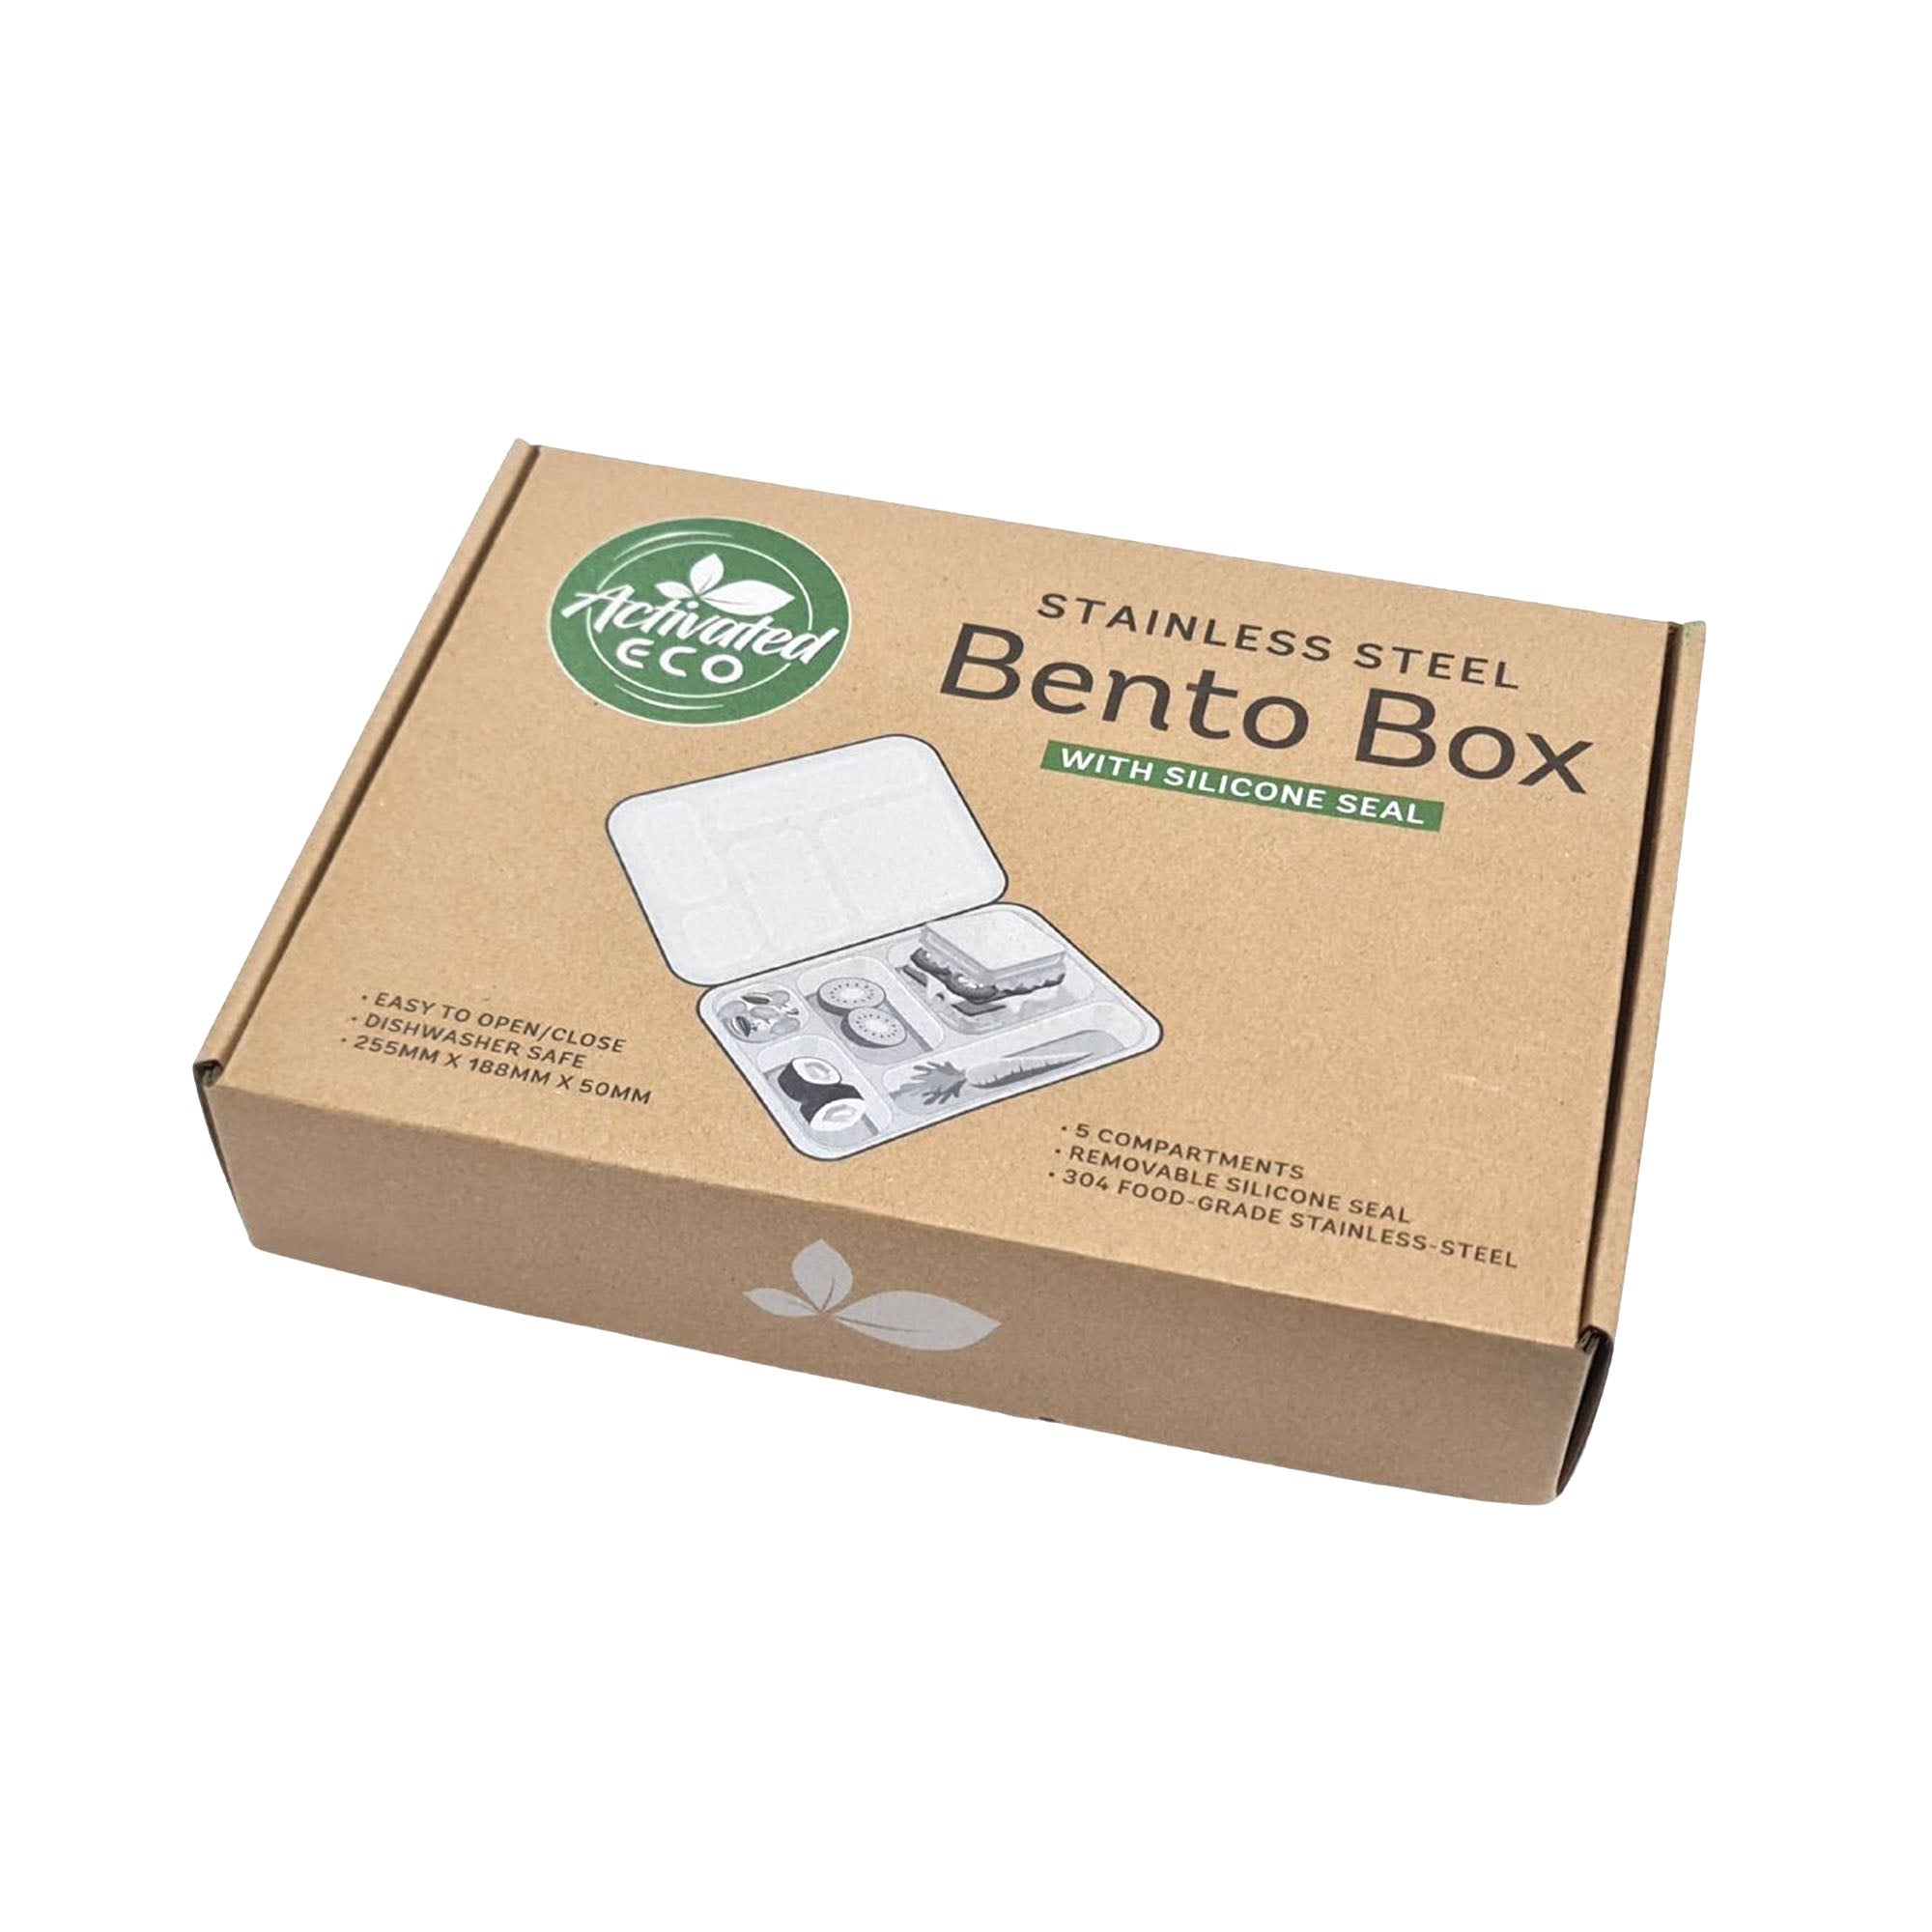 Activated Eco - Stainless Steel Bento Box with Silicone Seal - Go For Zero